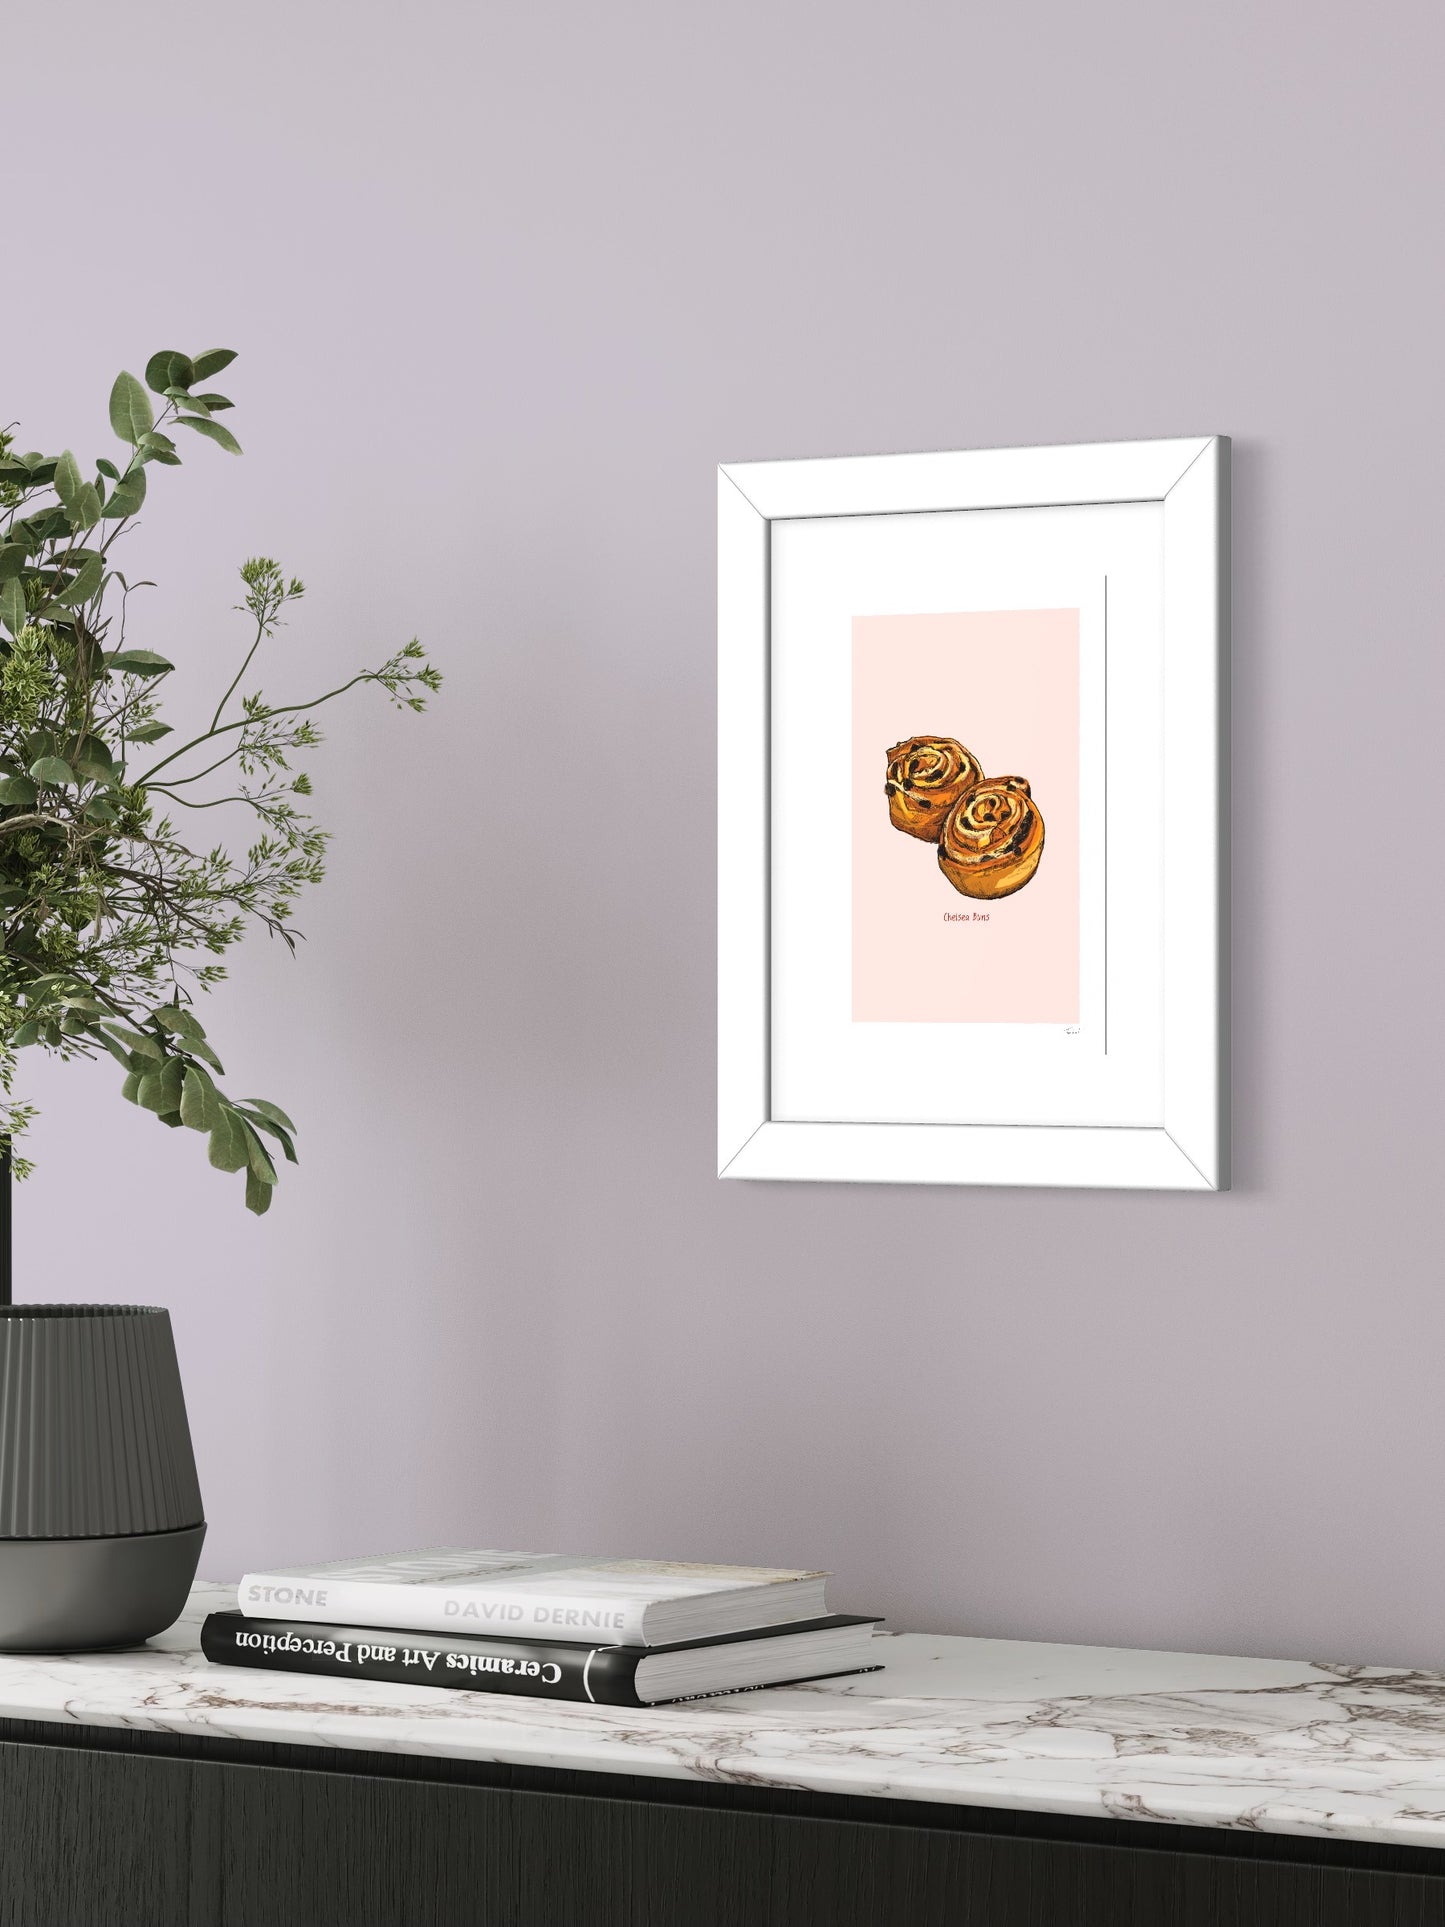 This image shows a giclee wall art print by Tom Laird Illustration of Chelsea Buns, framed in a beautiful living room with tasteful modern home decor. This art print is available from Tom Laird Illustration in various sizes.